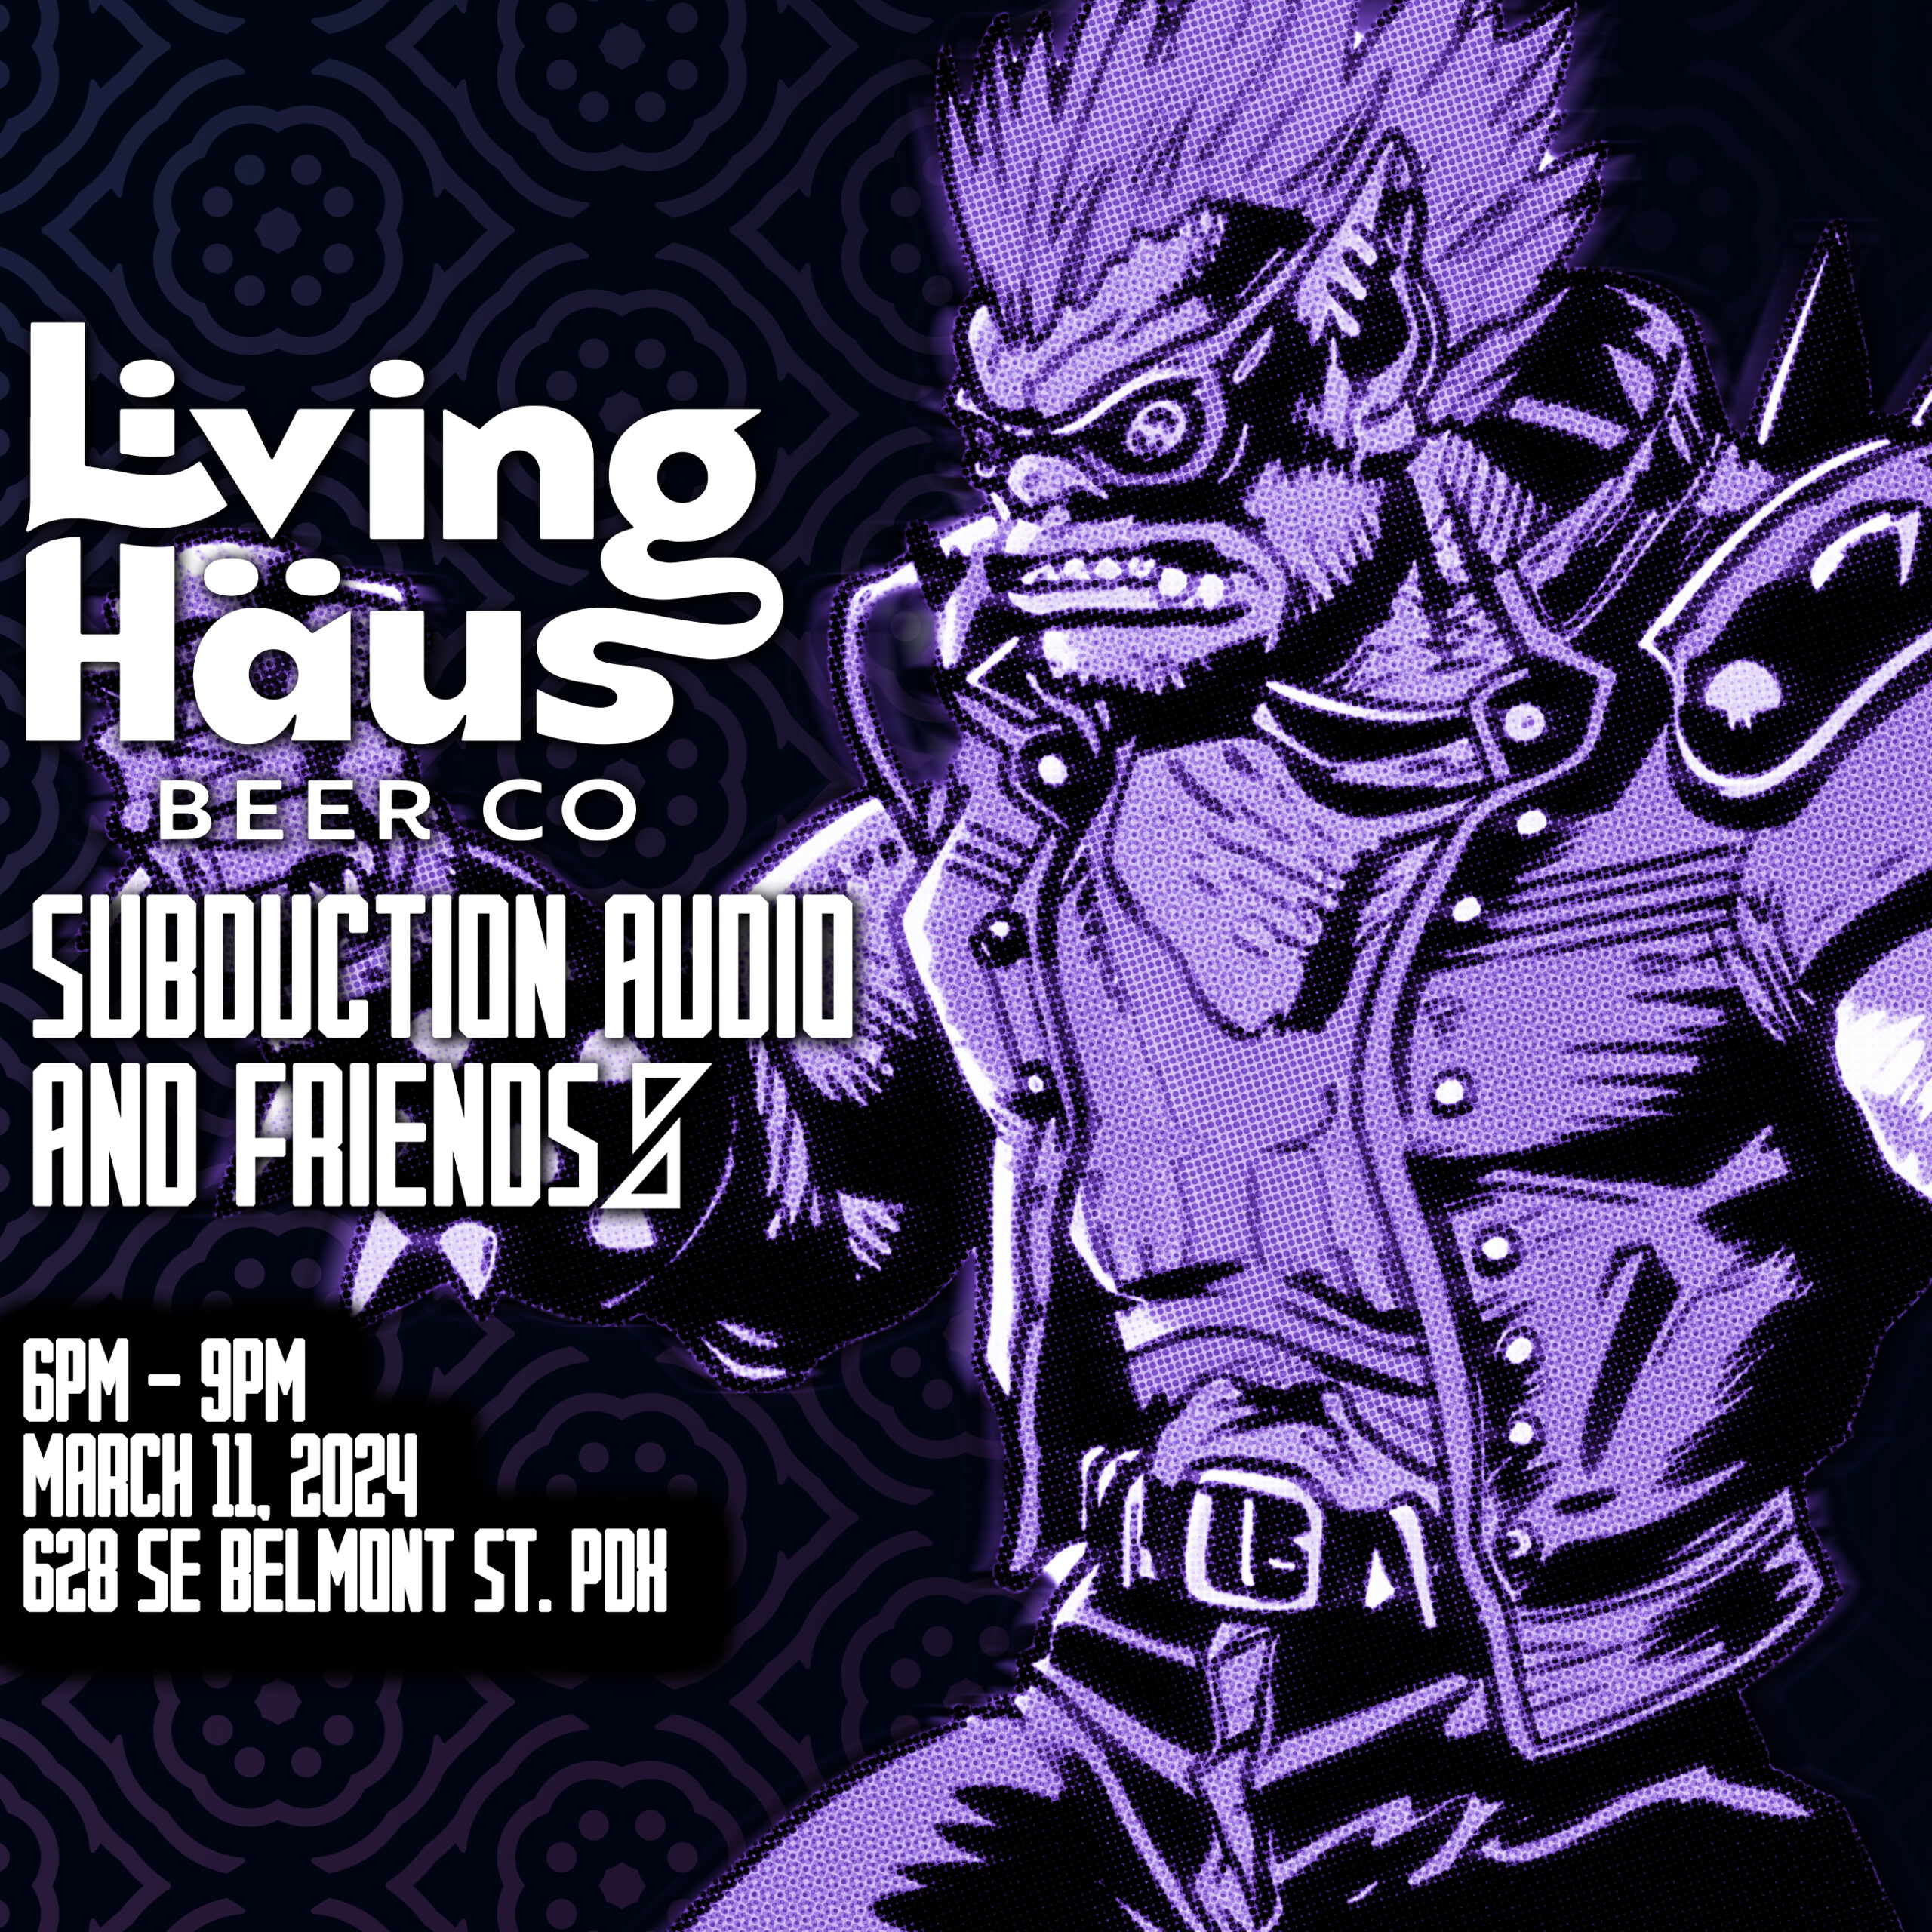 Subduction Audio and Friends 19